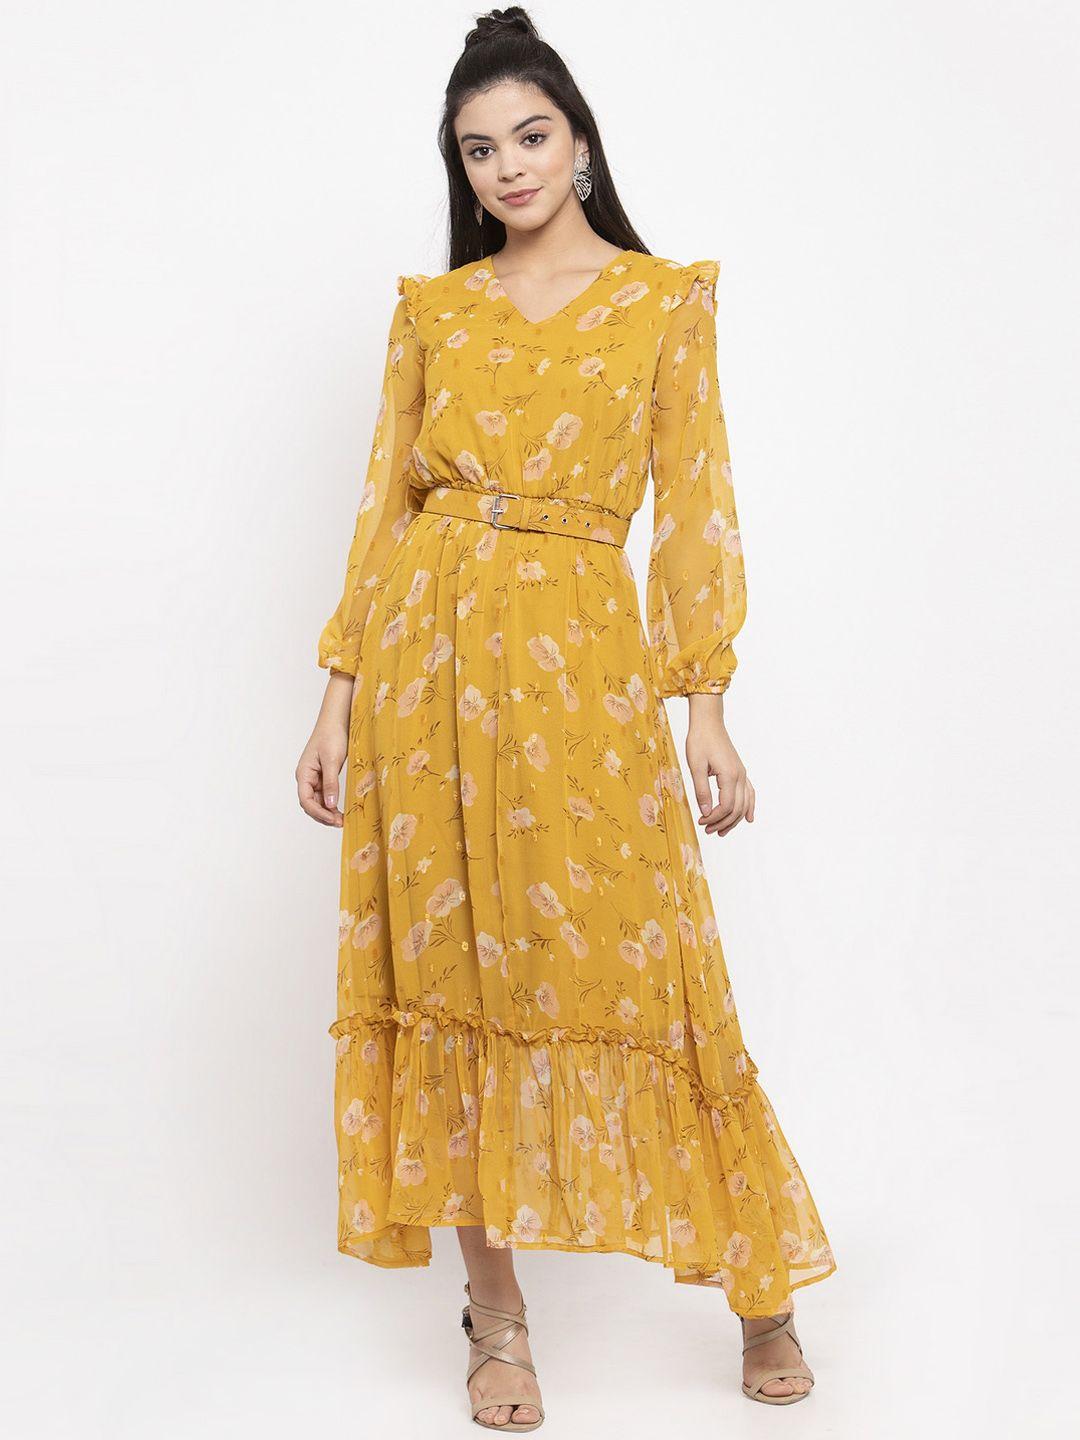 kassually-women-yellow-floral-printed-maxi-dress